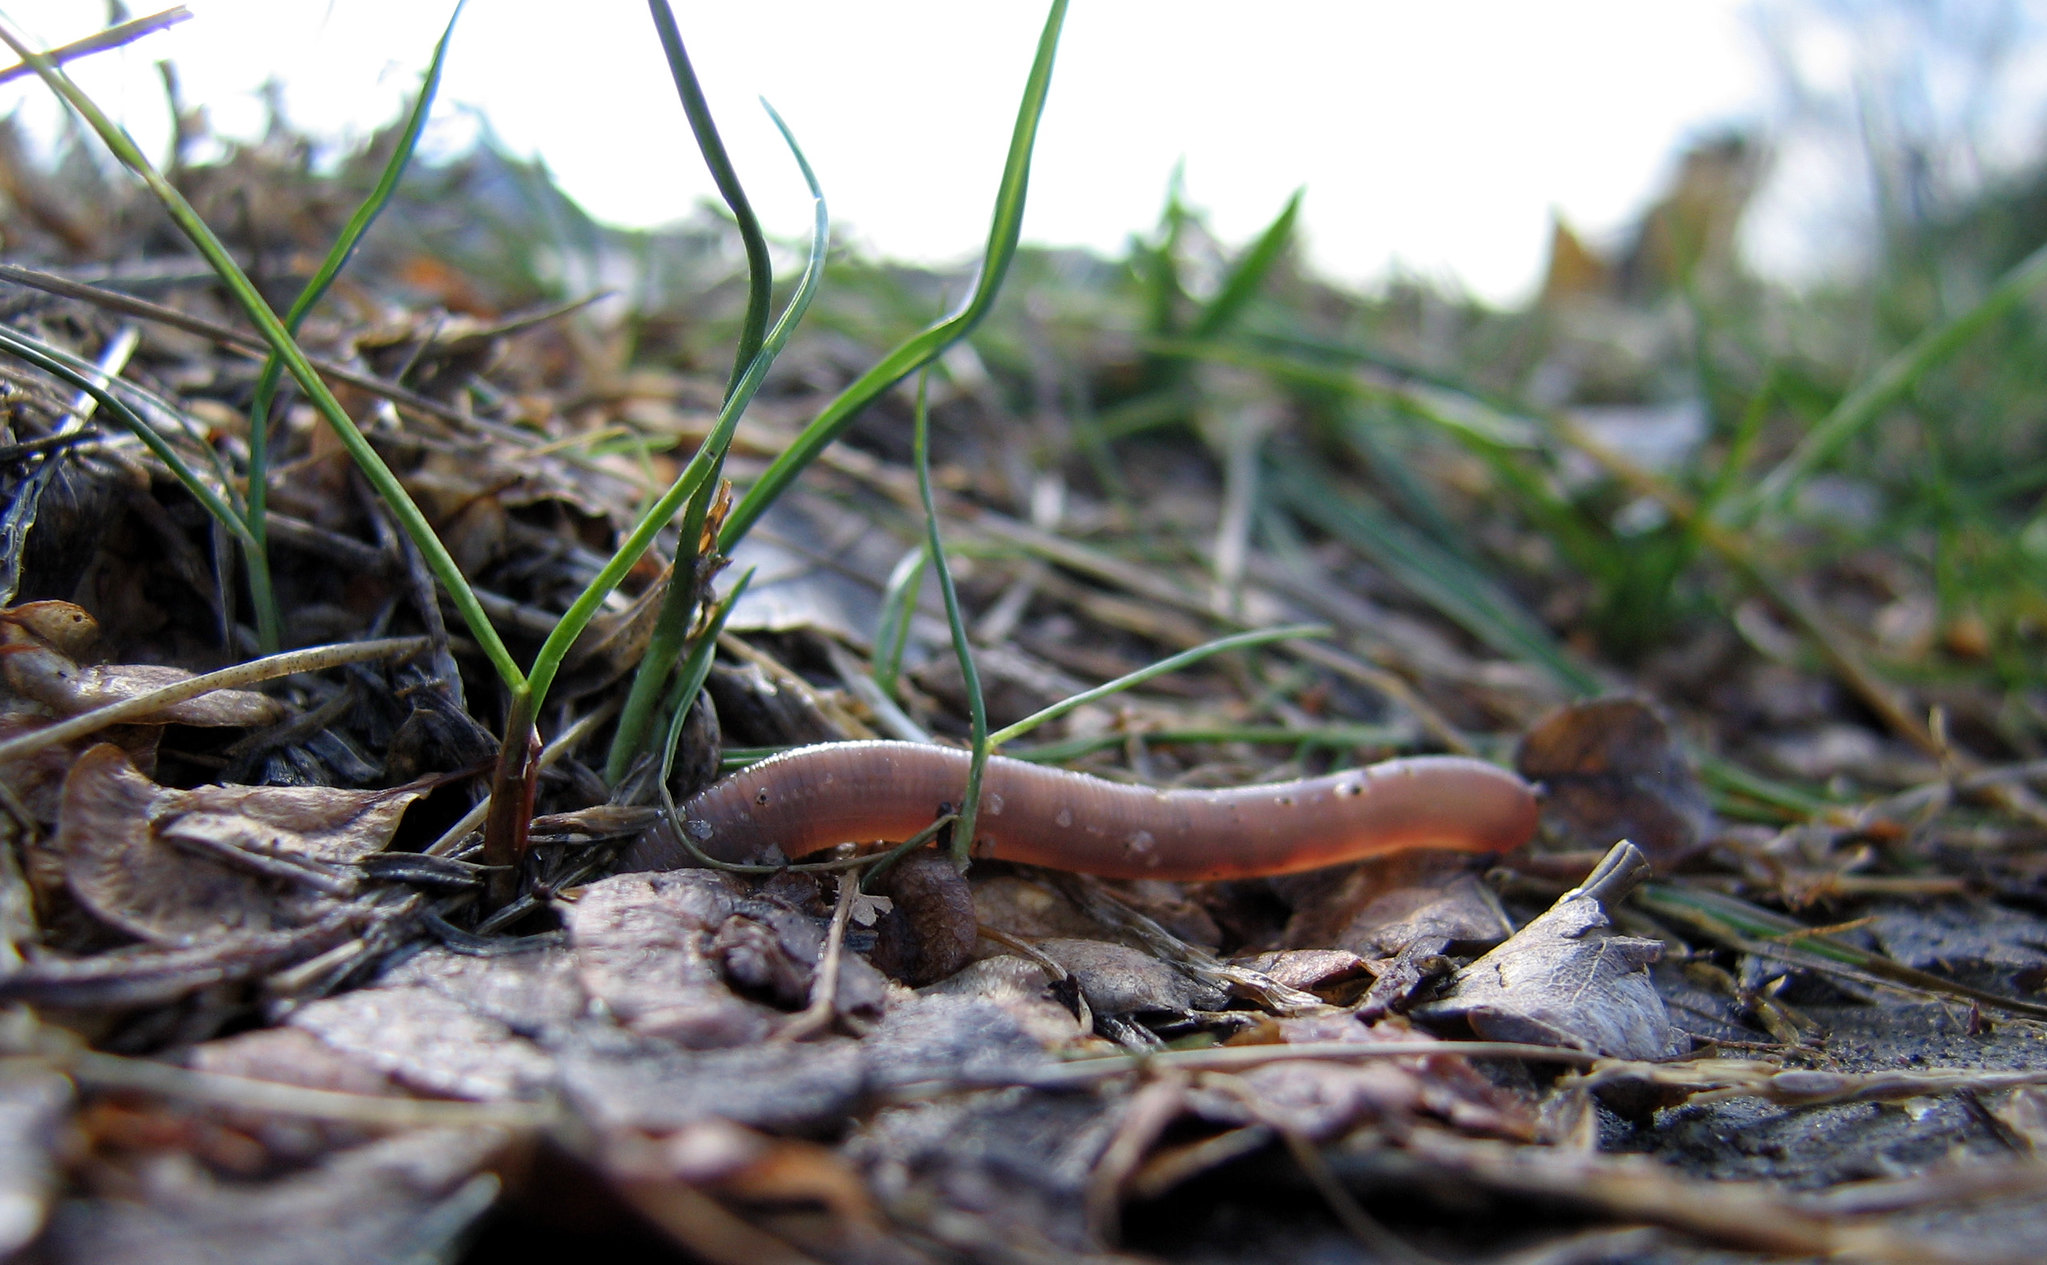 Earthworm diving into the soil between some blades of grass with leaves on the floor.